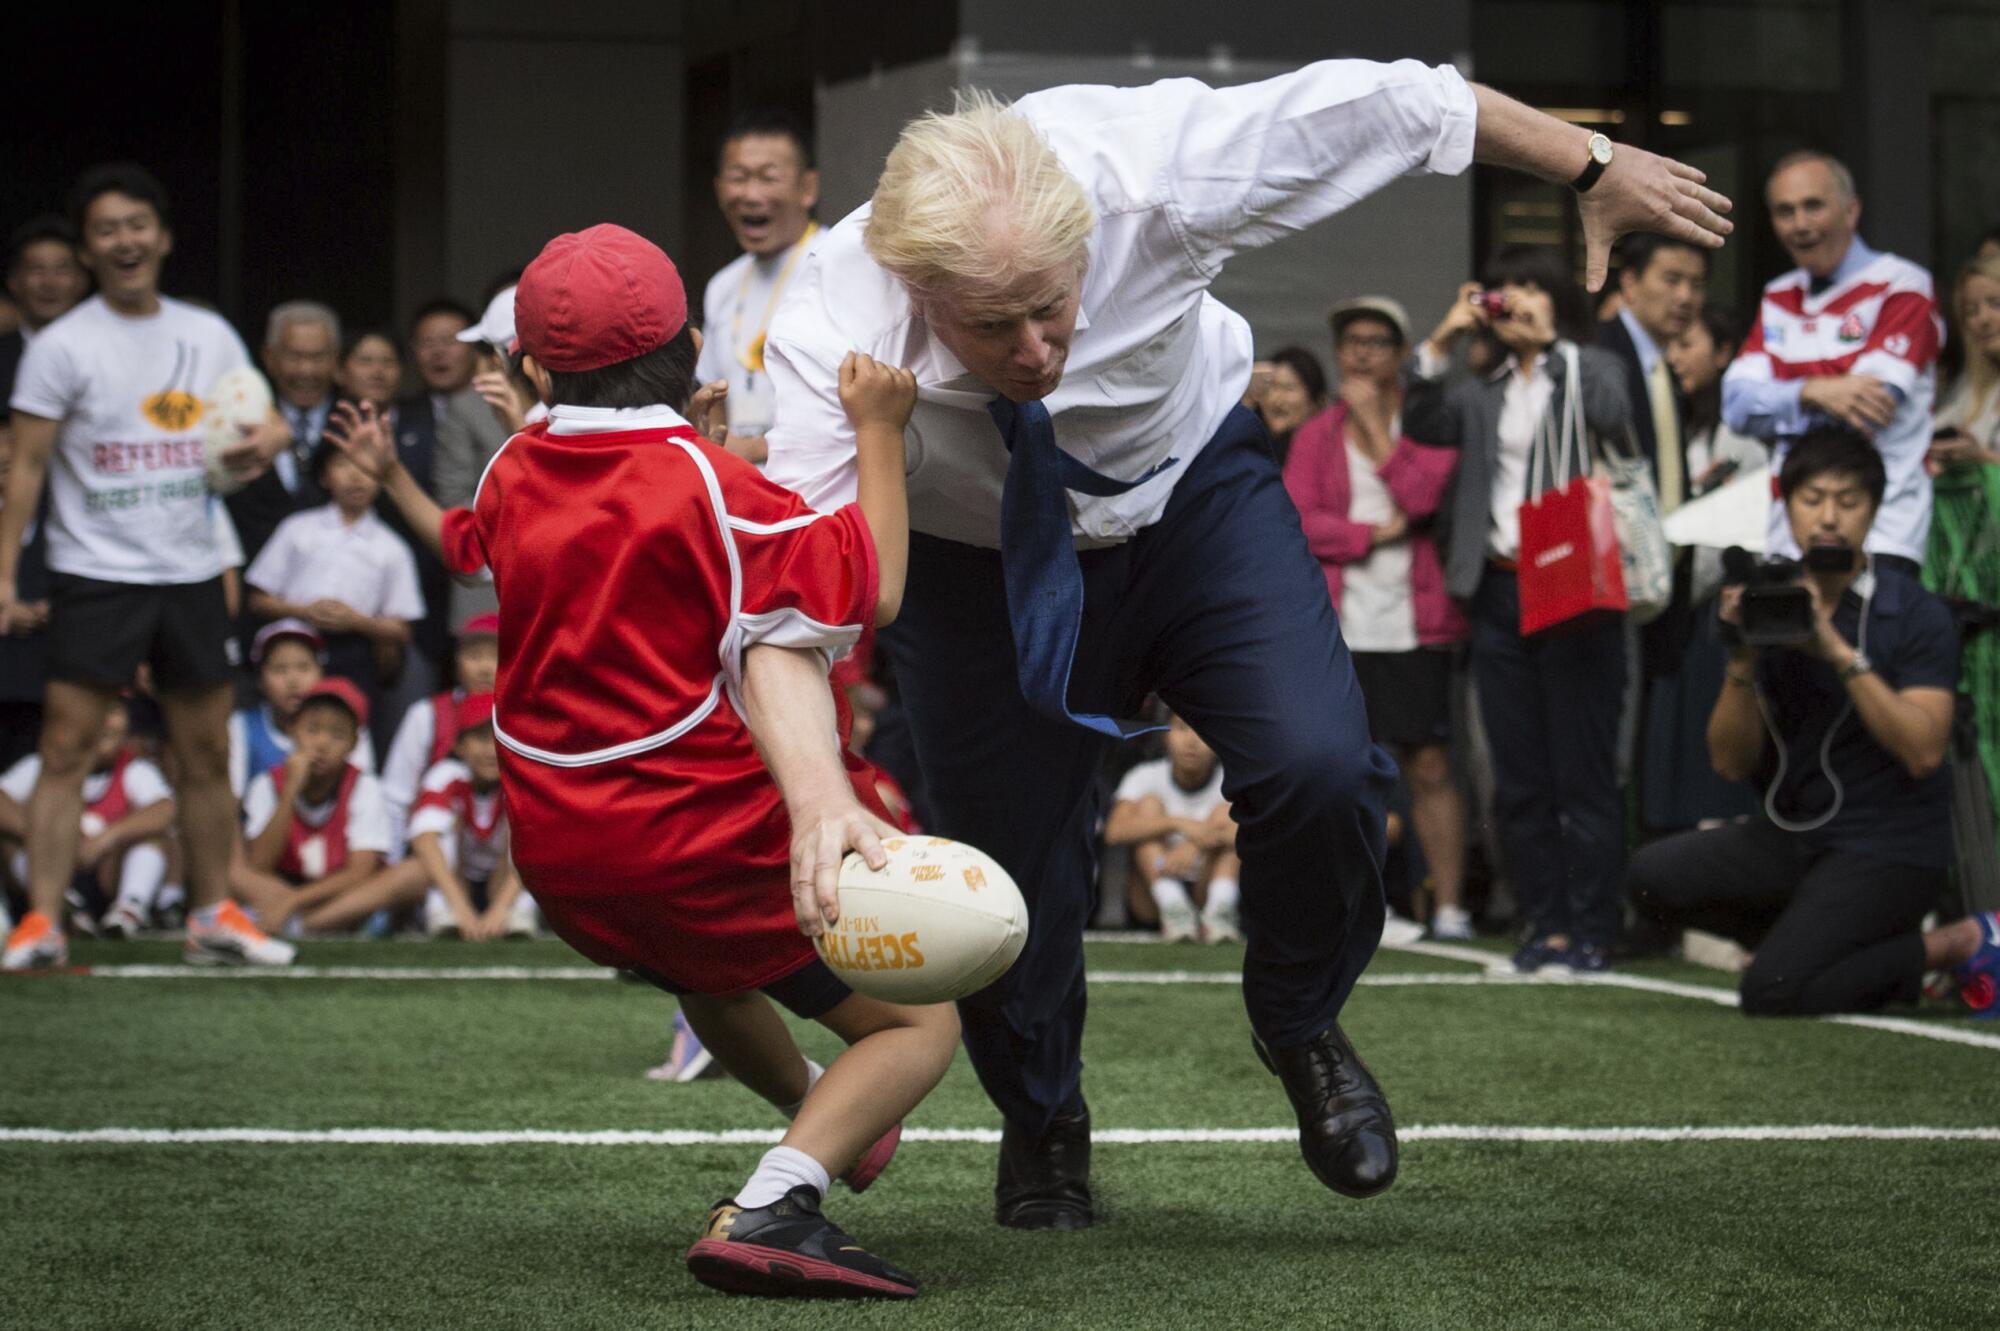 Boris Johnson takes part in a Street Rugby tournament in a Tokyo street Oct. 15, 2015.